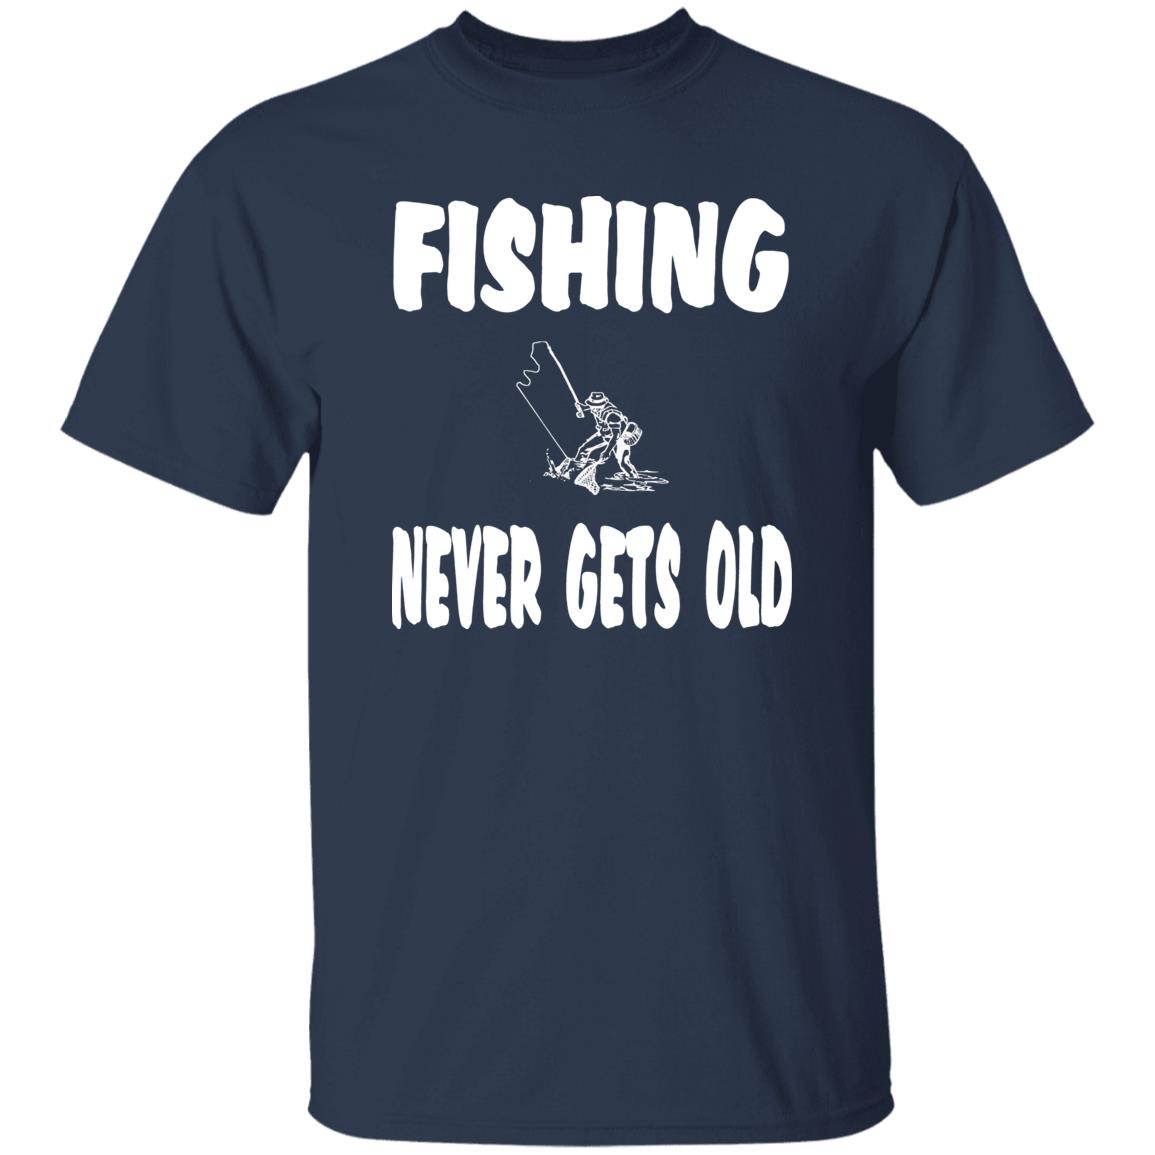 Fishing never gets old w t-shirt navy